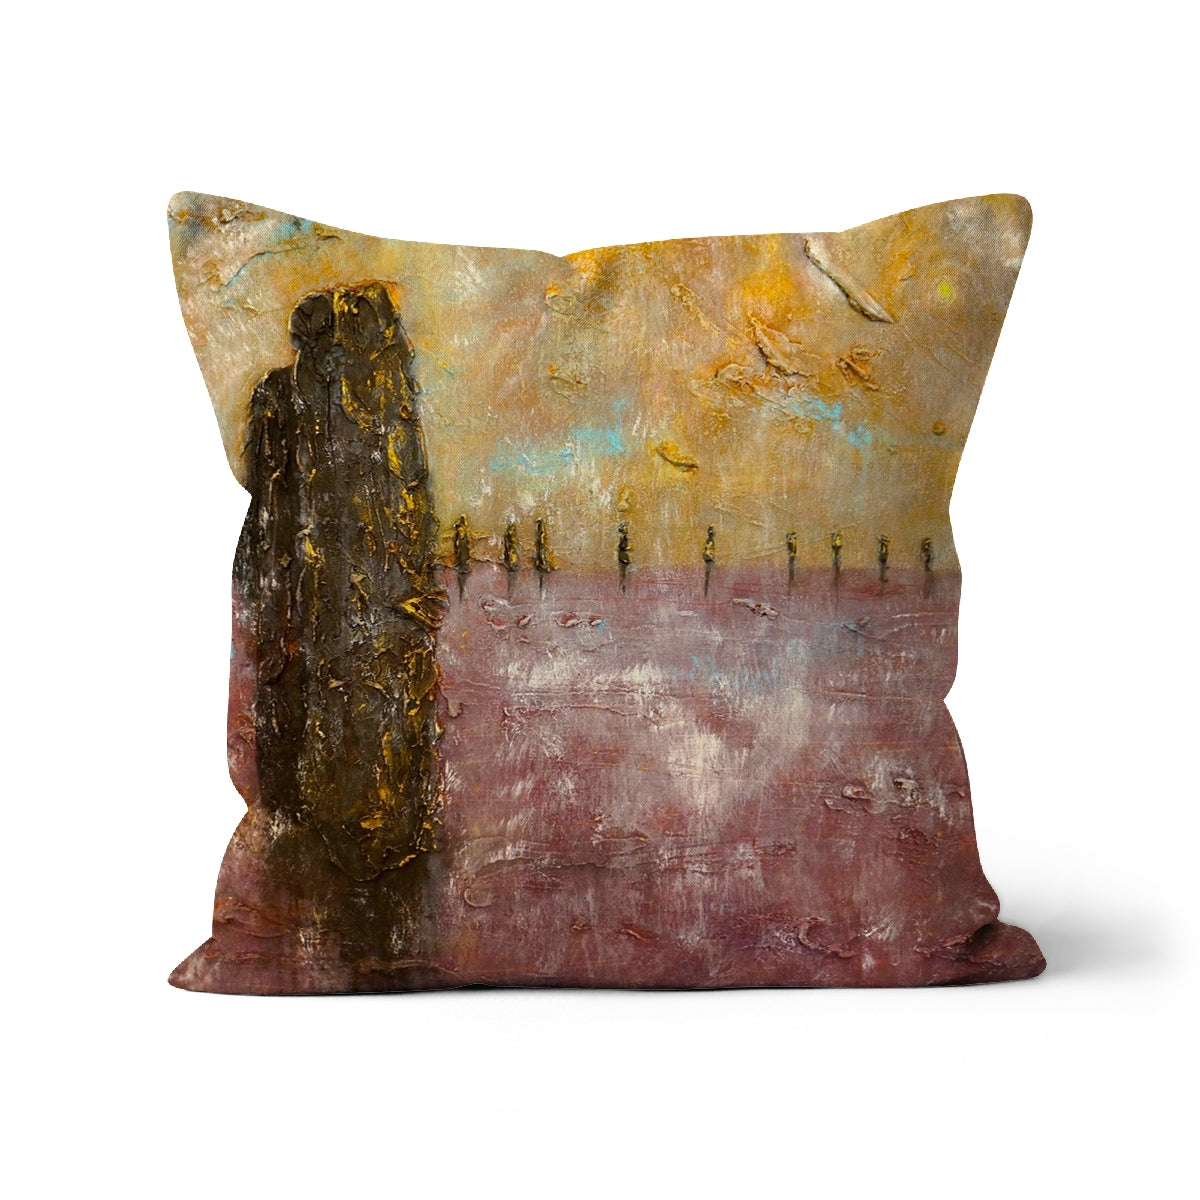 Bordgar Mist Orkney Art Gifts Cushion-Cushions-Orkney Art Gallery-Faux Suede-22"x22"-Paintings, Prints, Homeware, Art Gifts From Scotland By Scottish Artist Kevin Hunter